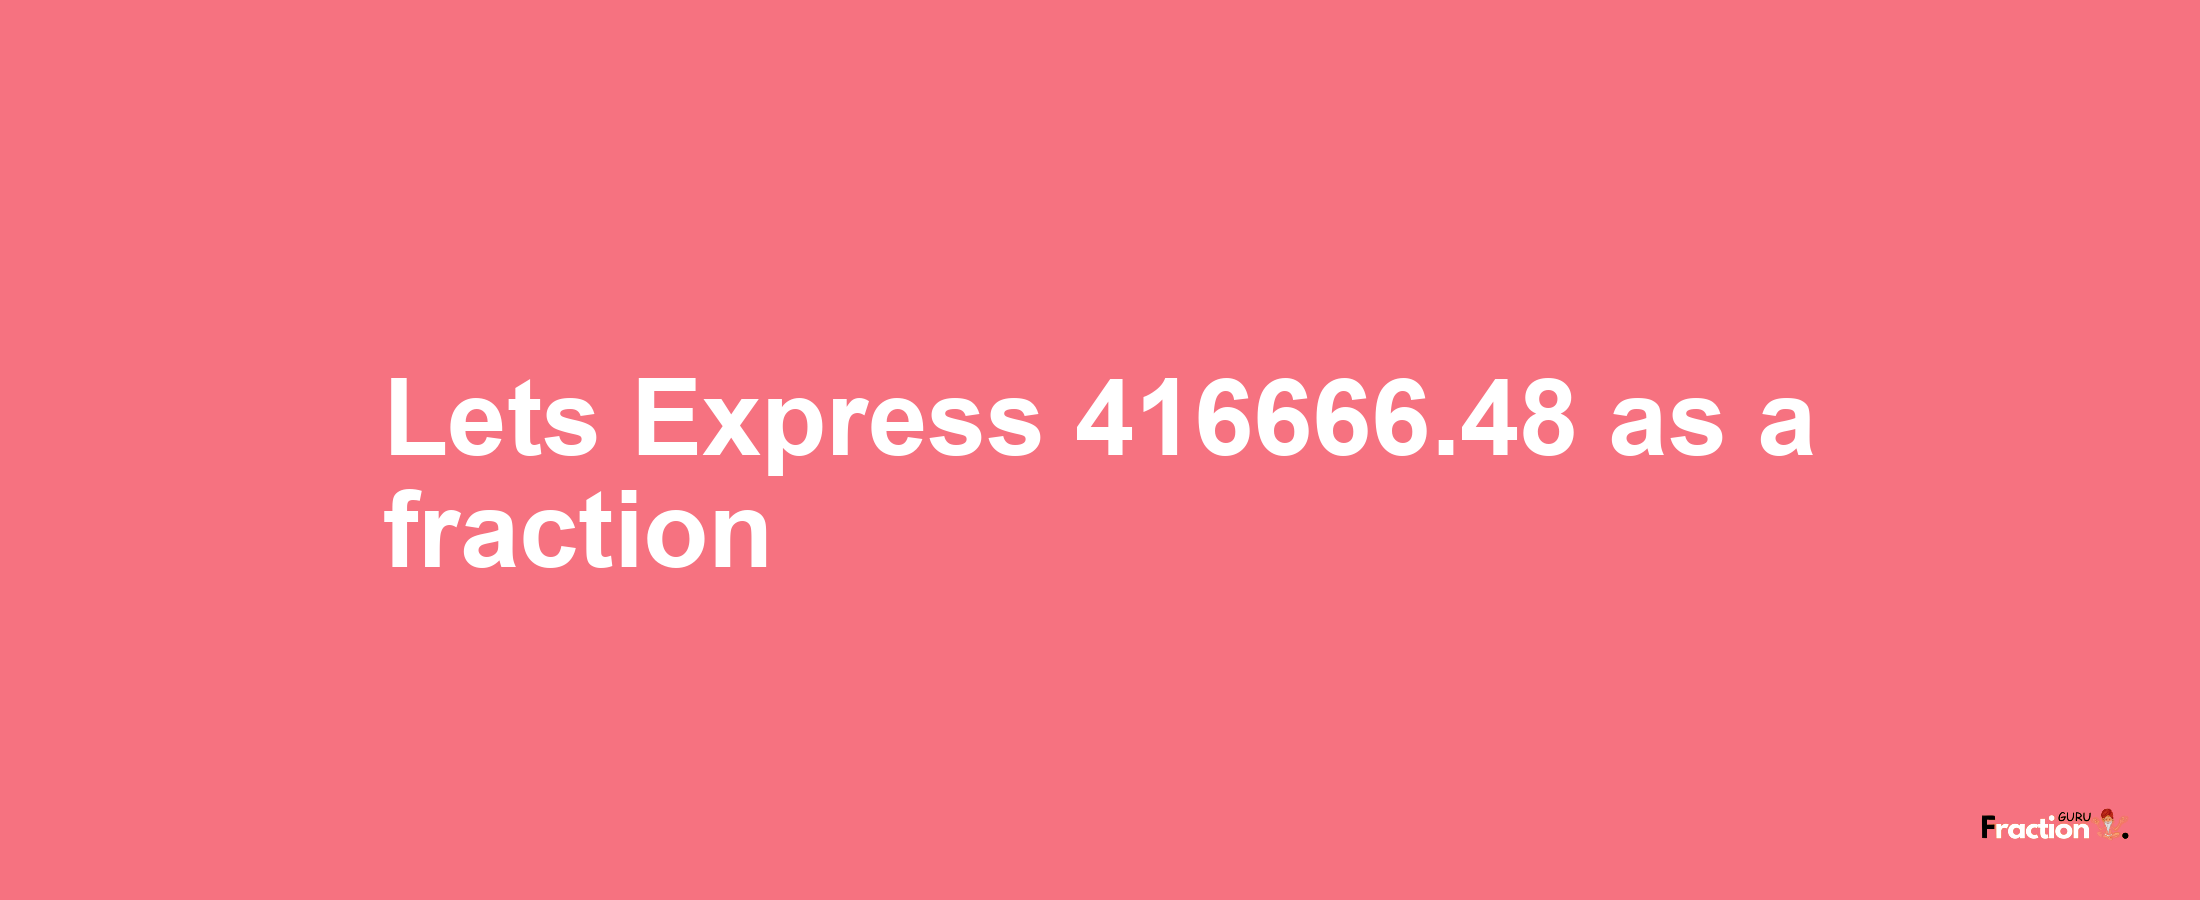 Lets Express 416666.48 as afraction